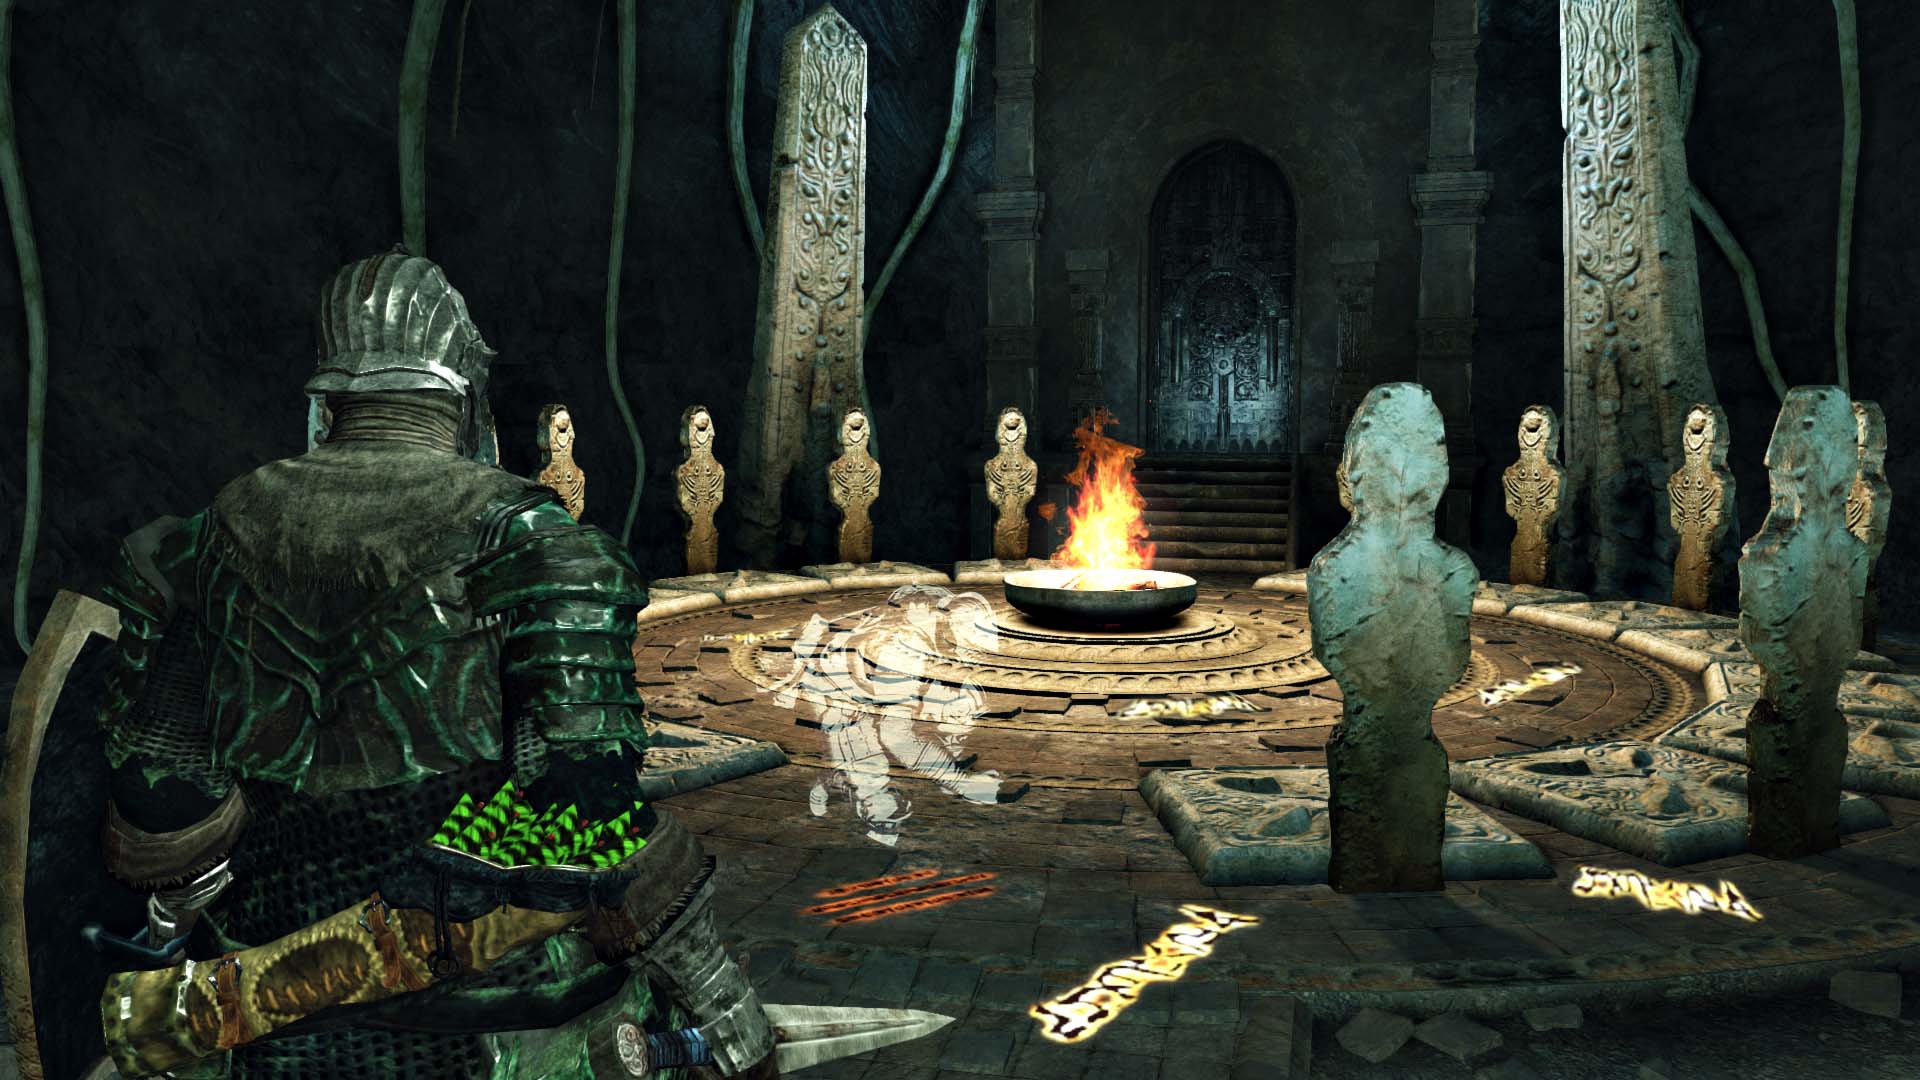 dark-souls-2-crown-of-the-sunken-king-dlc-screenshots-revealed-page-5-of-17-attack-of-the